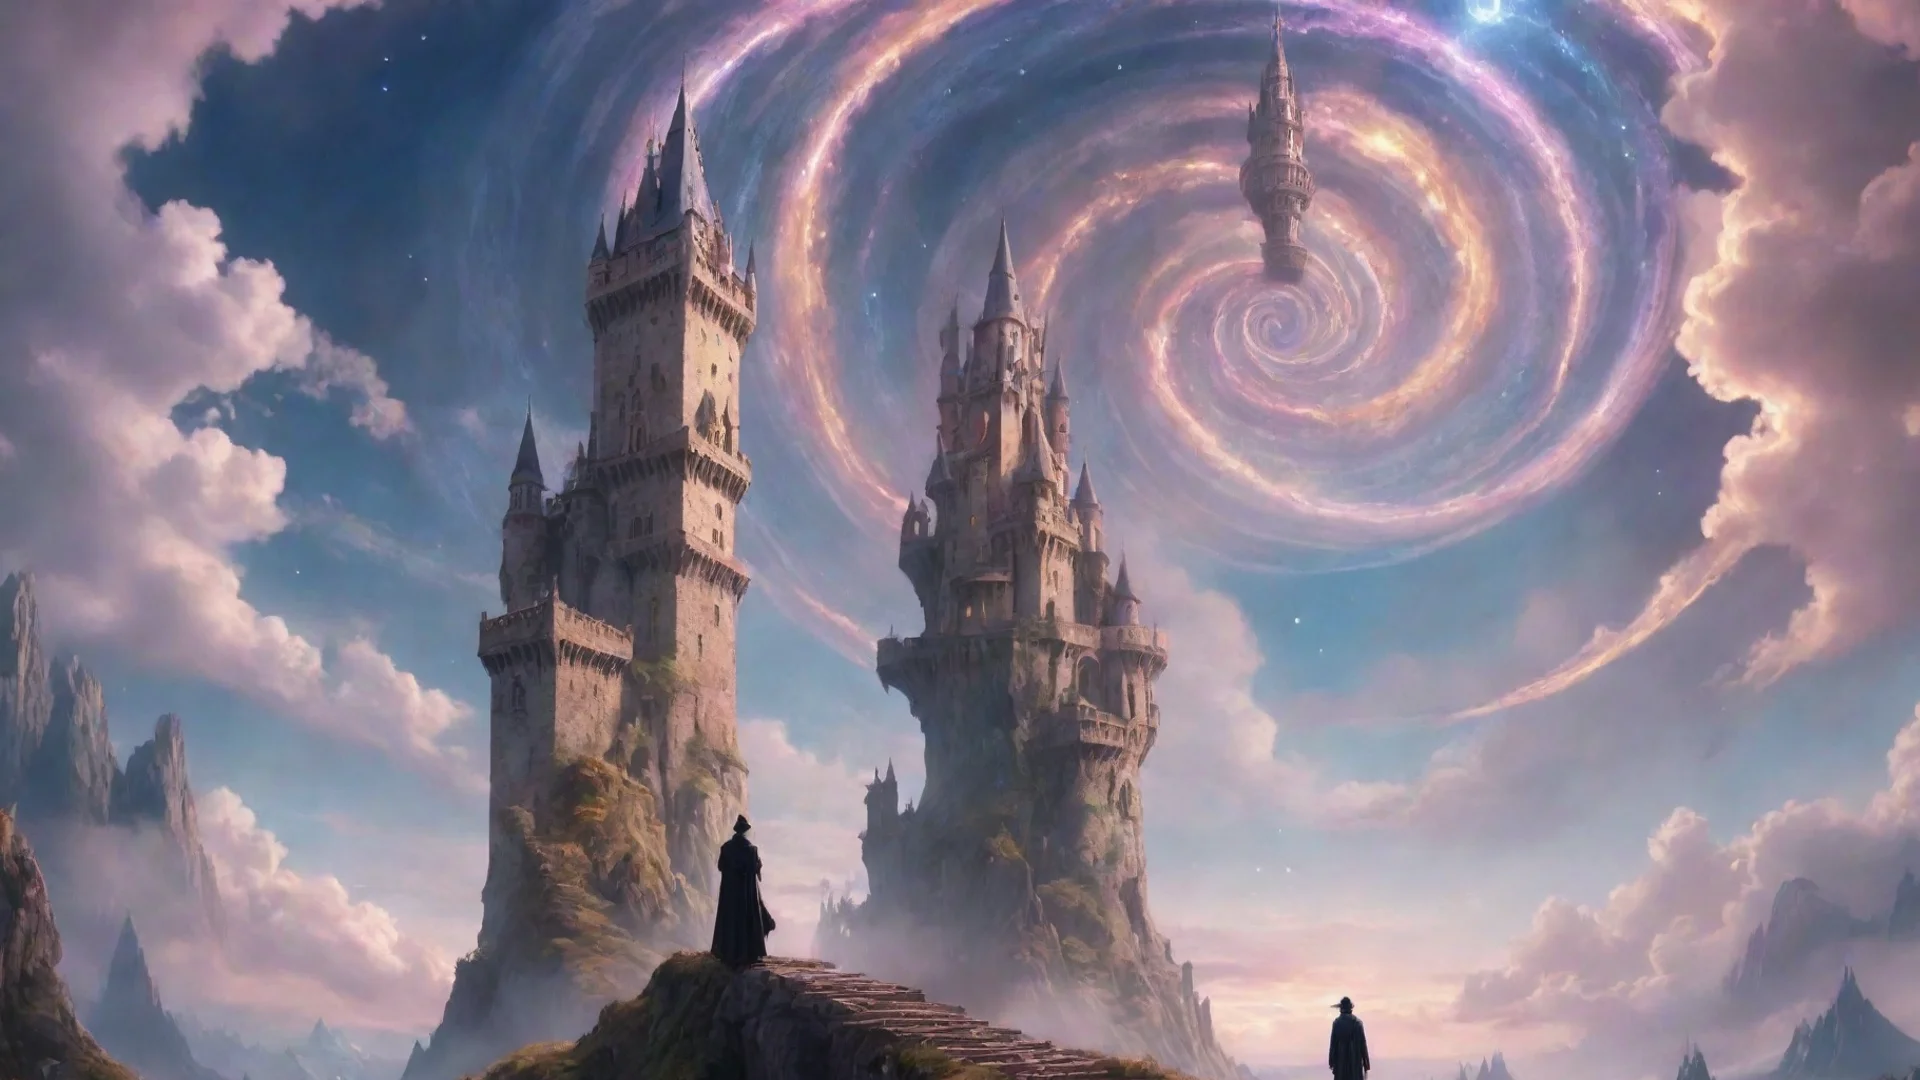 artstation art magical world with a wizard looking a spiraling impossible tower hd aesthetic omg confident engaging wow 3 wide